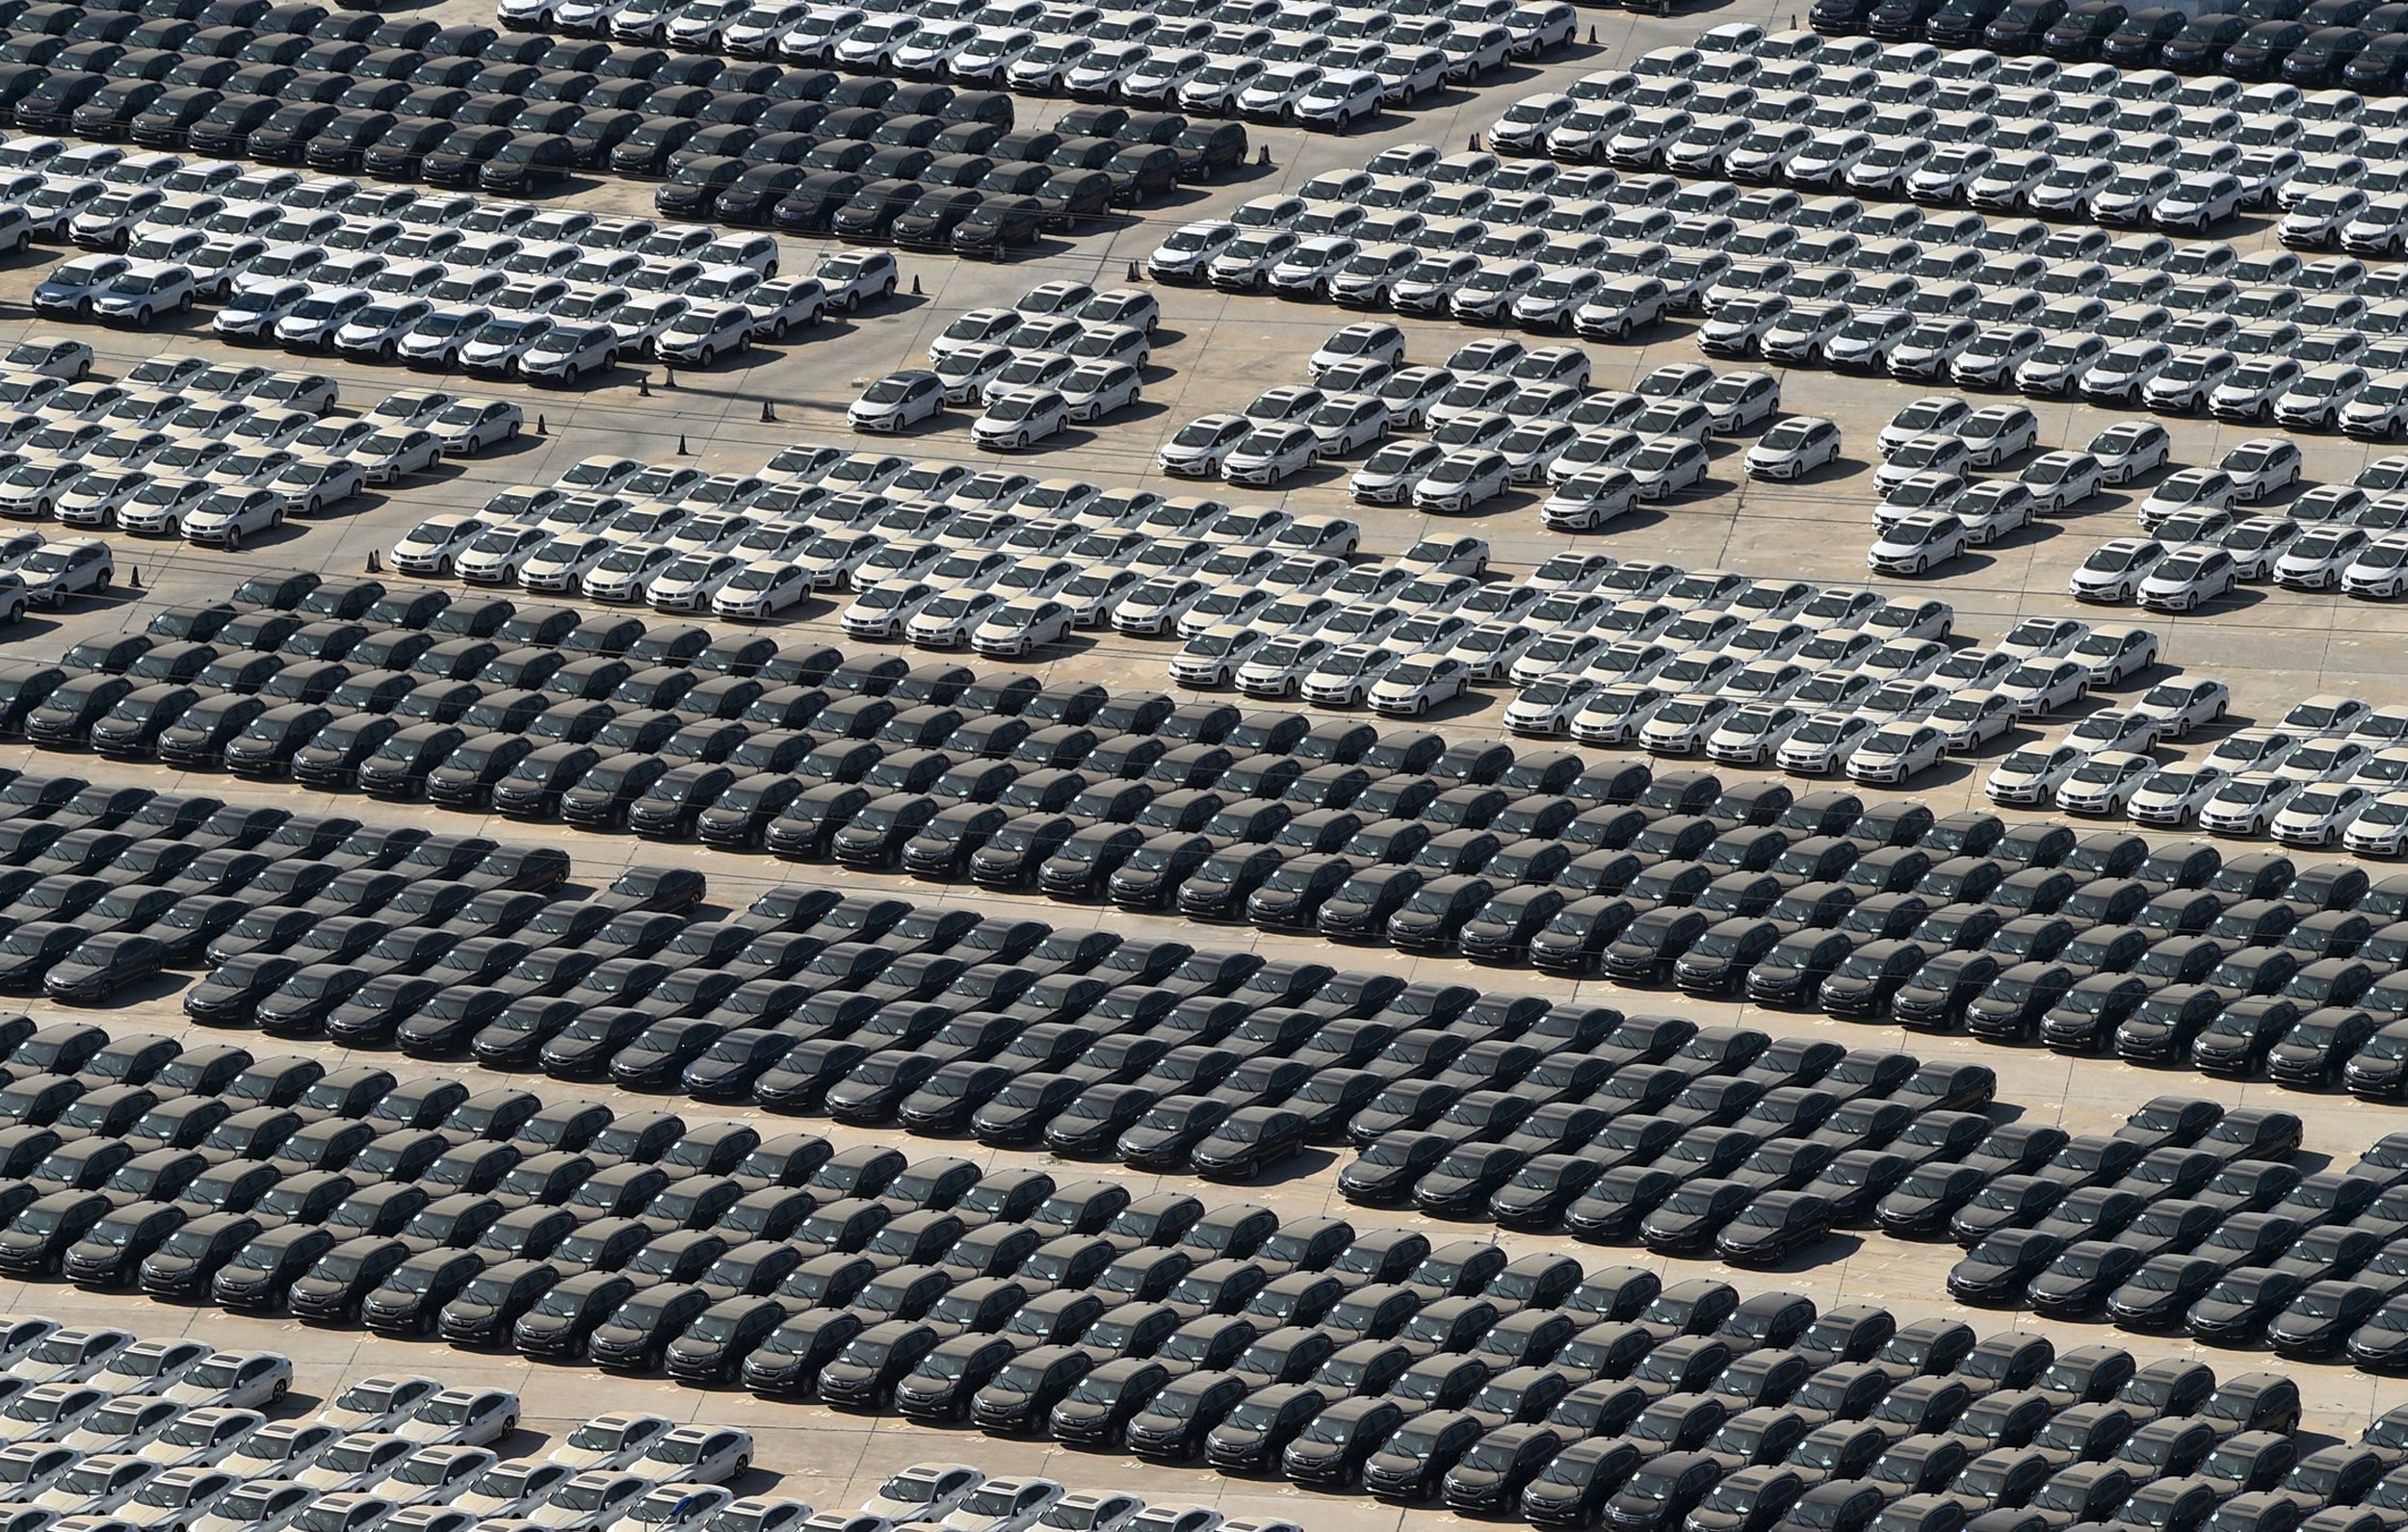 New vehicles are seen at a parking area of an automobile factory in Wuhan, Hubei province, August 1, 2015. Automakers in China may be forced to come up with more drastic mitigation measures when July sales results released from this week likely reveal a fourth month of contraction after a stock market crash sapped consumer sentiment. Picture taken August 1, 2015. REUTERS/China Daily CHINA OUT. NO COMMERCIAL OR EDITORIAL SALES IN CHINA